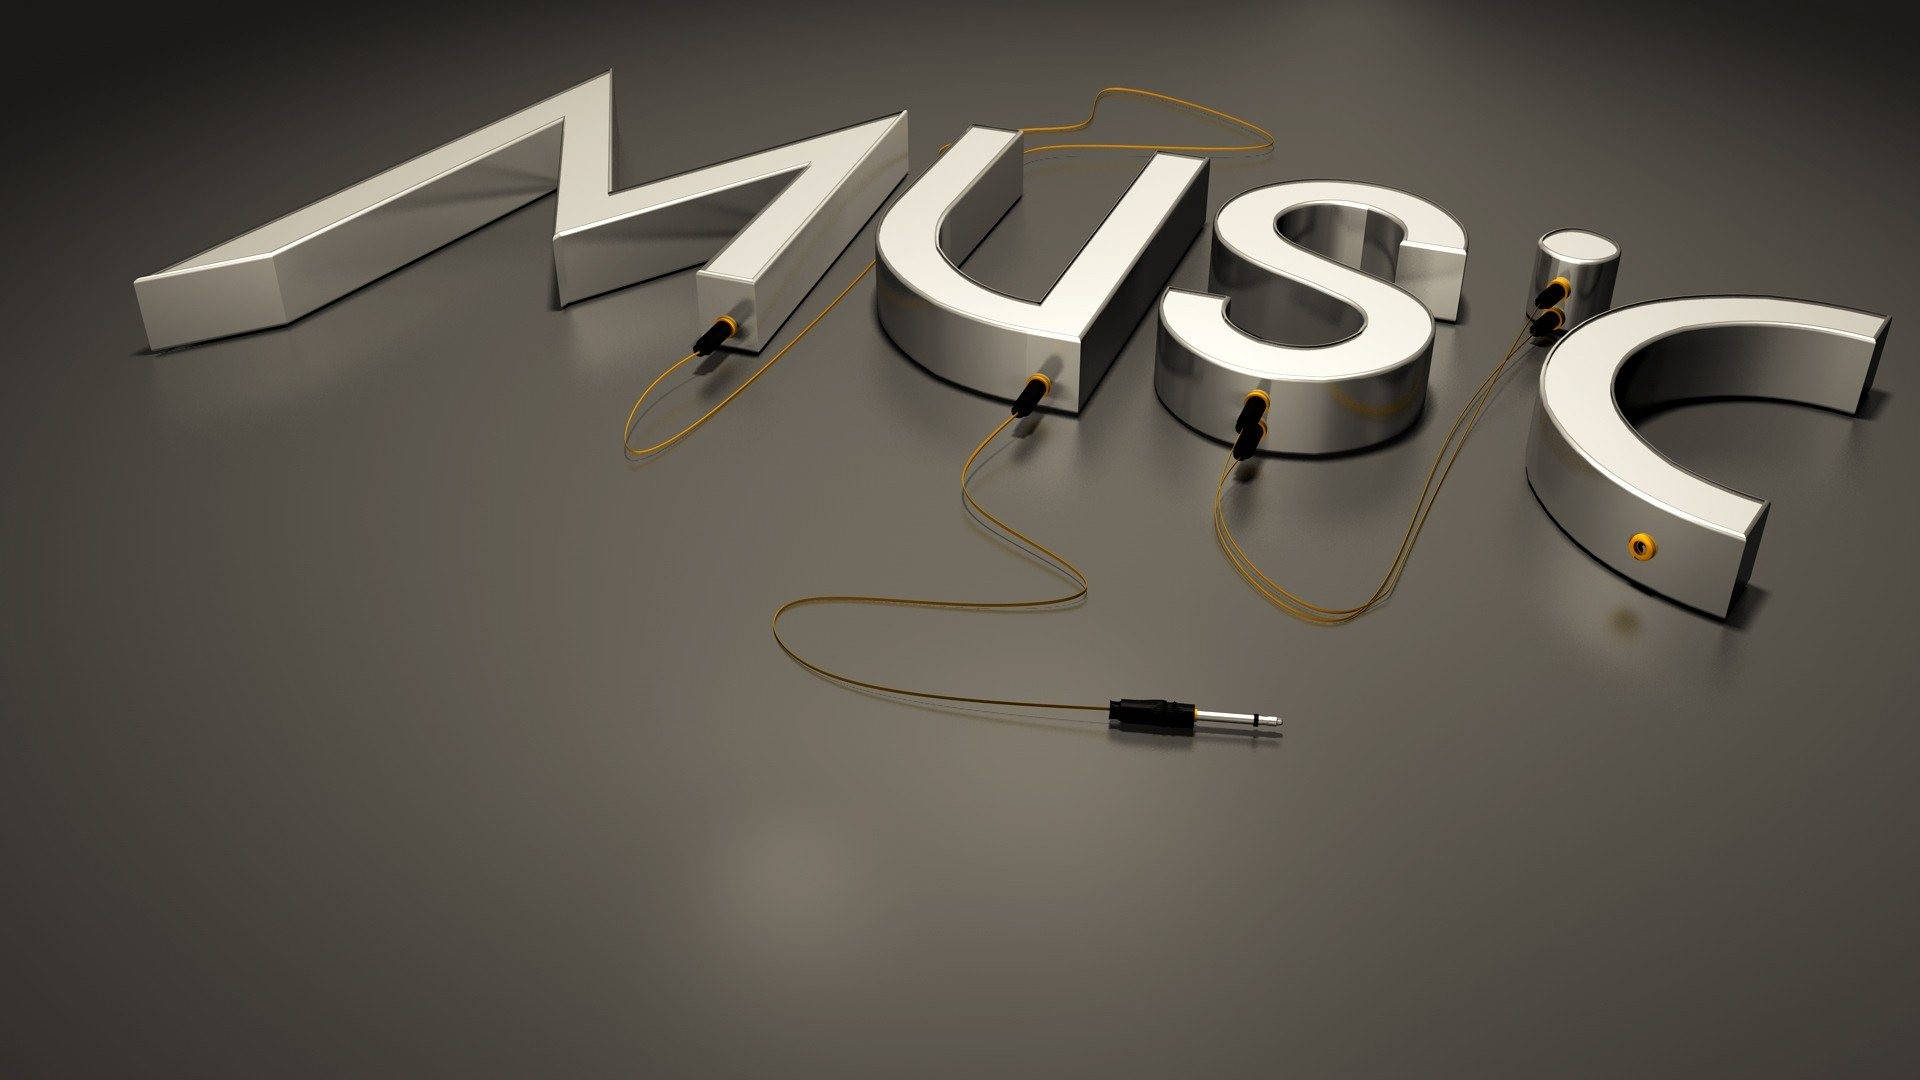 Music Text Wire Jack Designed